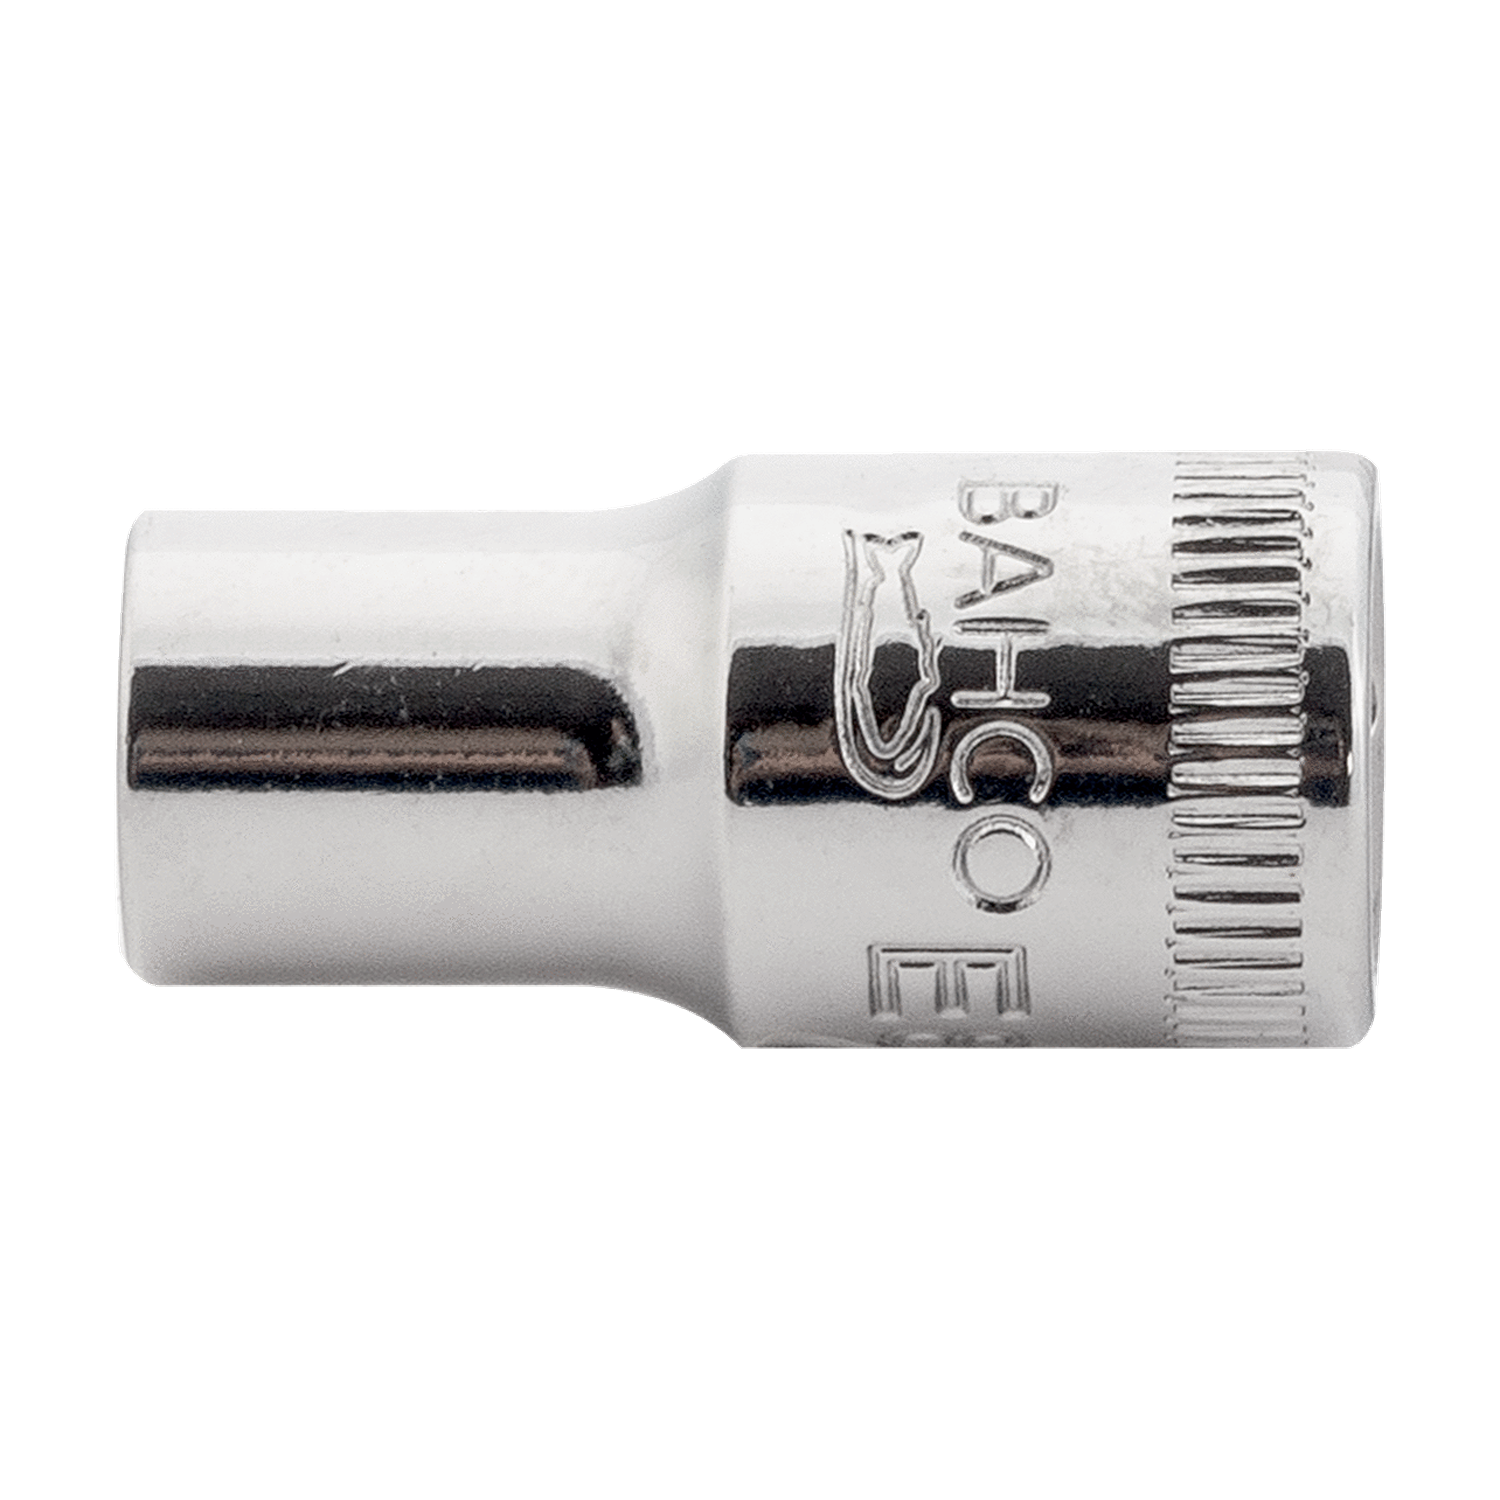 BAHCO 6700TORX-E 1/4" Square Drive Socket With Torx Profile - Premium Square Drive Socket from BAHCO - Shop now at Yew Aik.